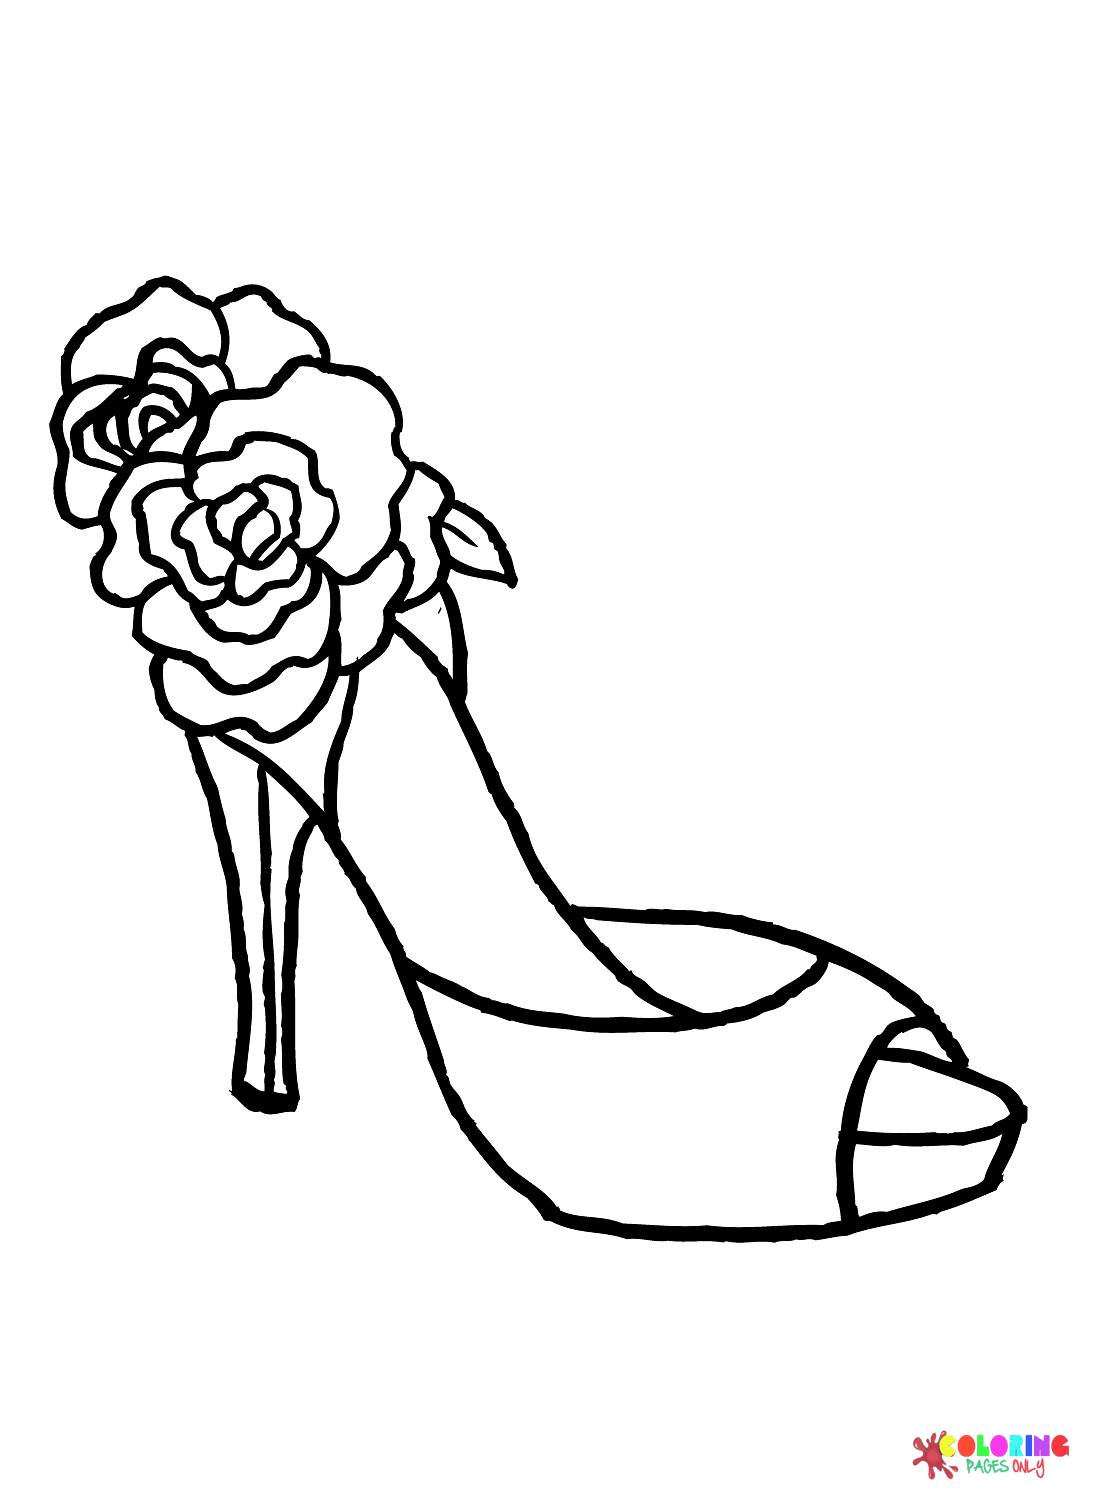 Wedding Shoe with Flowers Coloring Page - Free Printable Coloring Pages